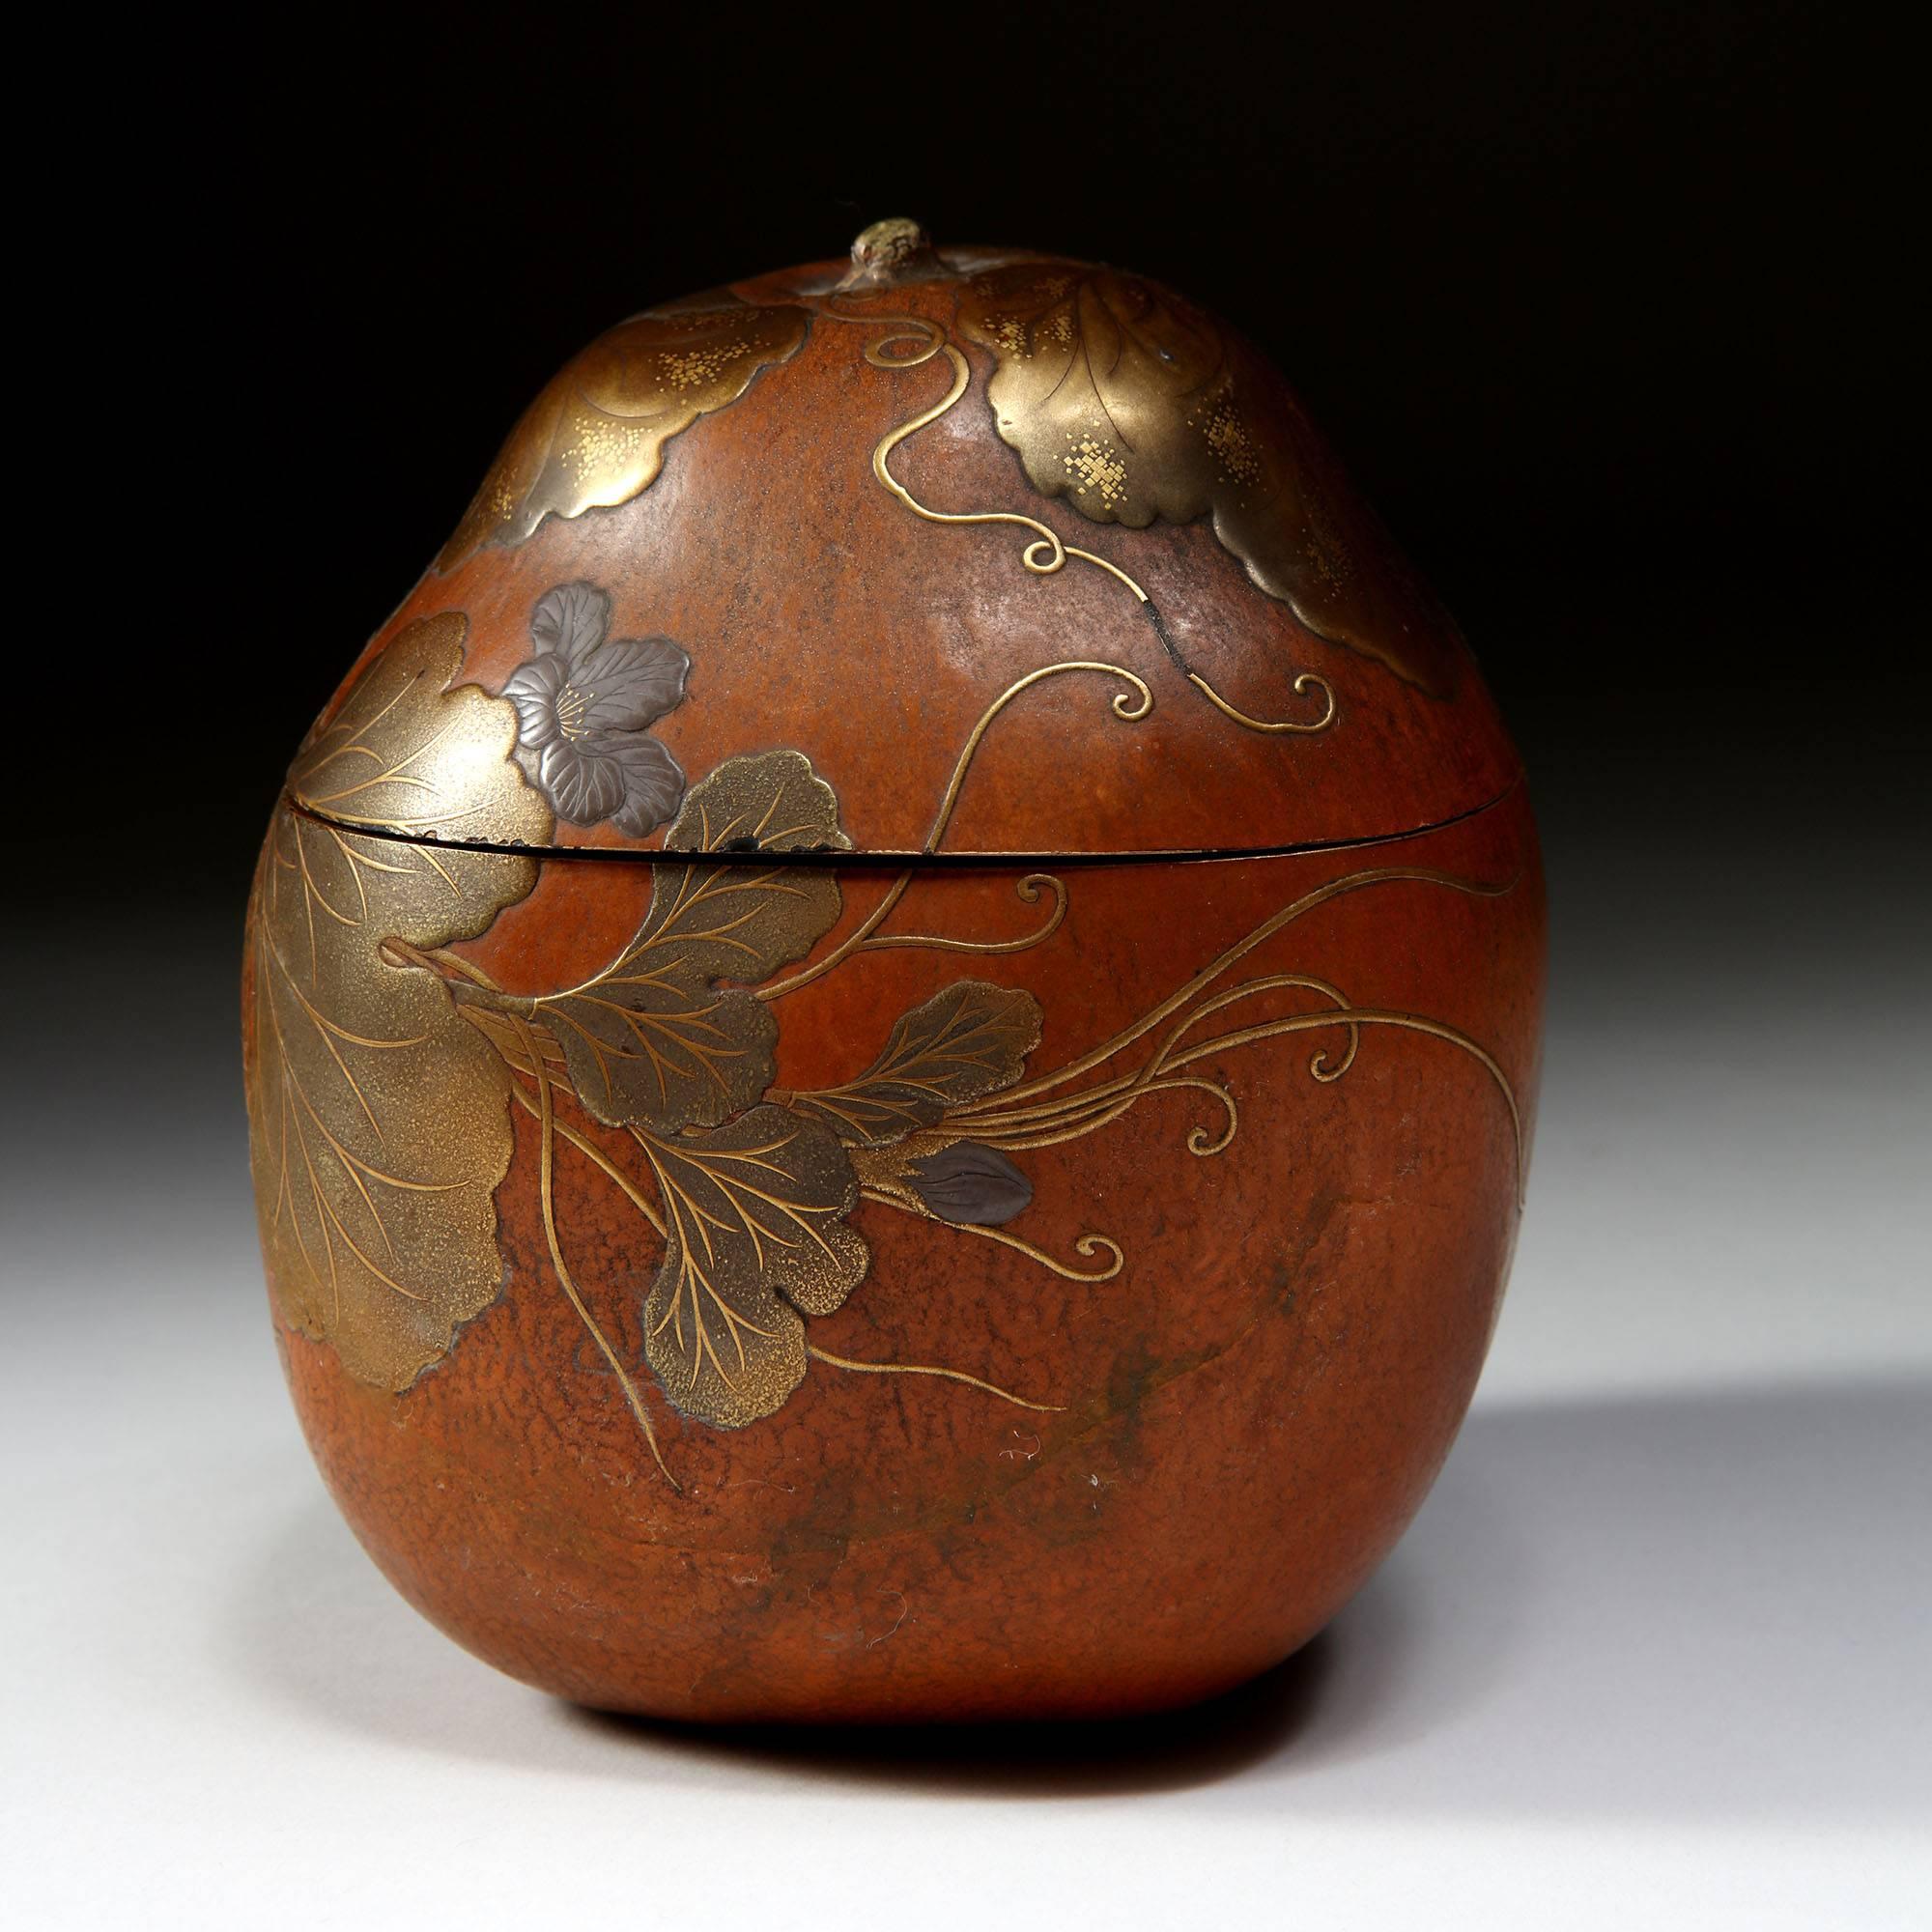 A dine 19th century Japanese gourd decorated with fine naturalistic gilt and lacquer leaves and tendrils. The interior opening to dark lacquer with gilt and red flecks.

Measures: Height 11.5cm
Diameter 10.5cm.